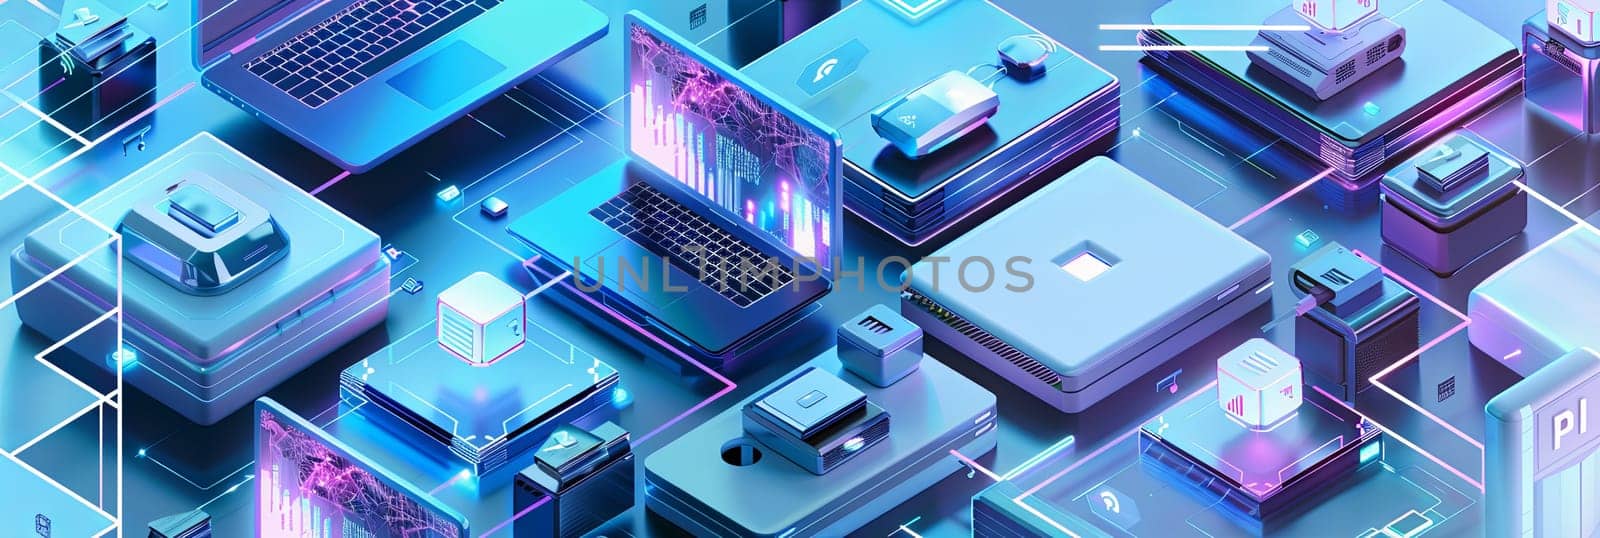 A collection of computers, laptops, liaisons, and other technology equipment depicted in isometric style with white and blue colors.